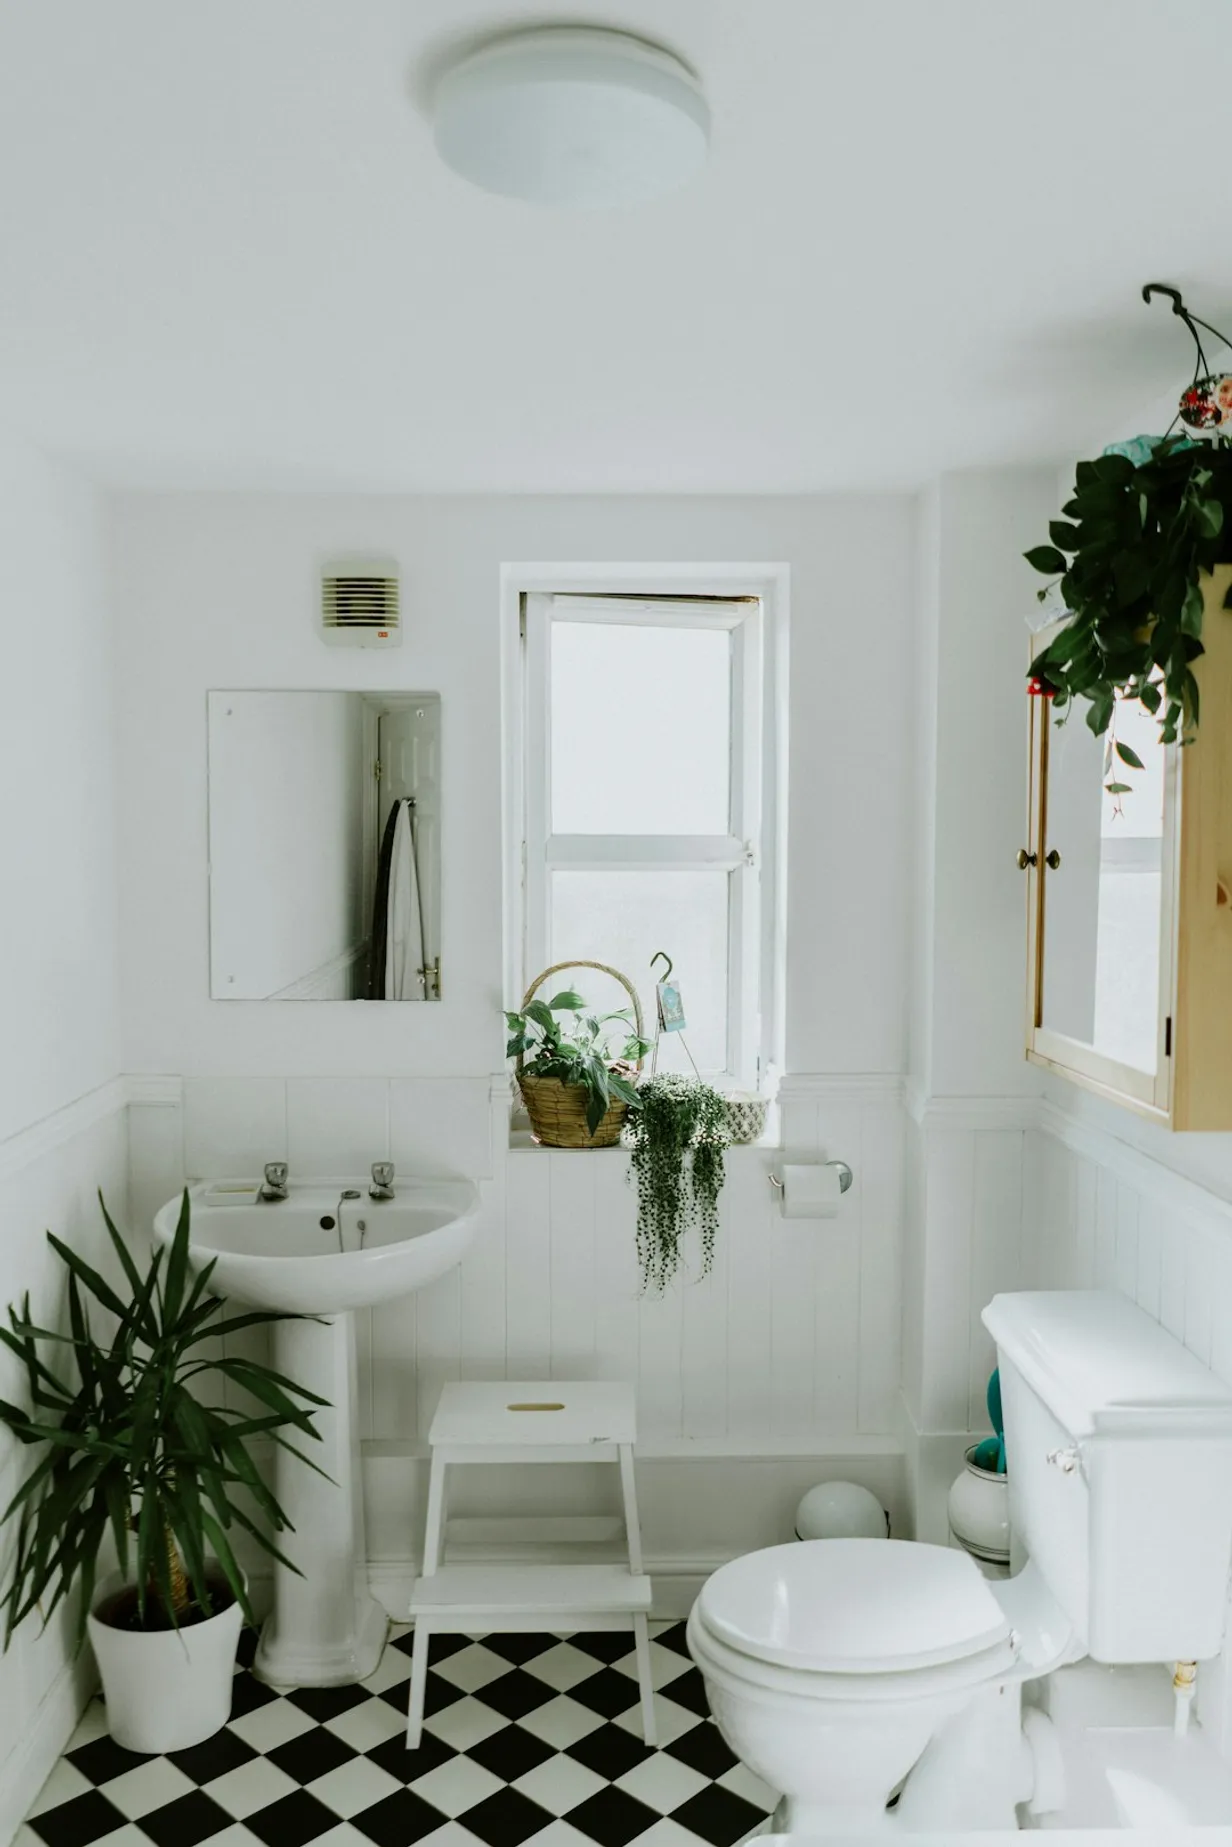 Maximizing Space and Functionality in Small Bathrooms and KitchensIllustration